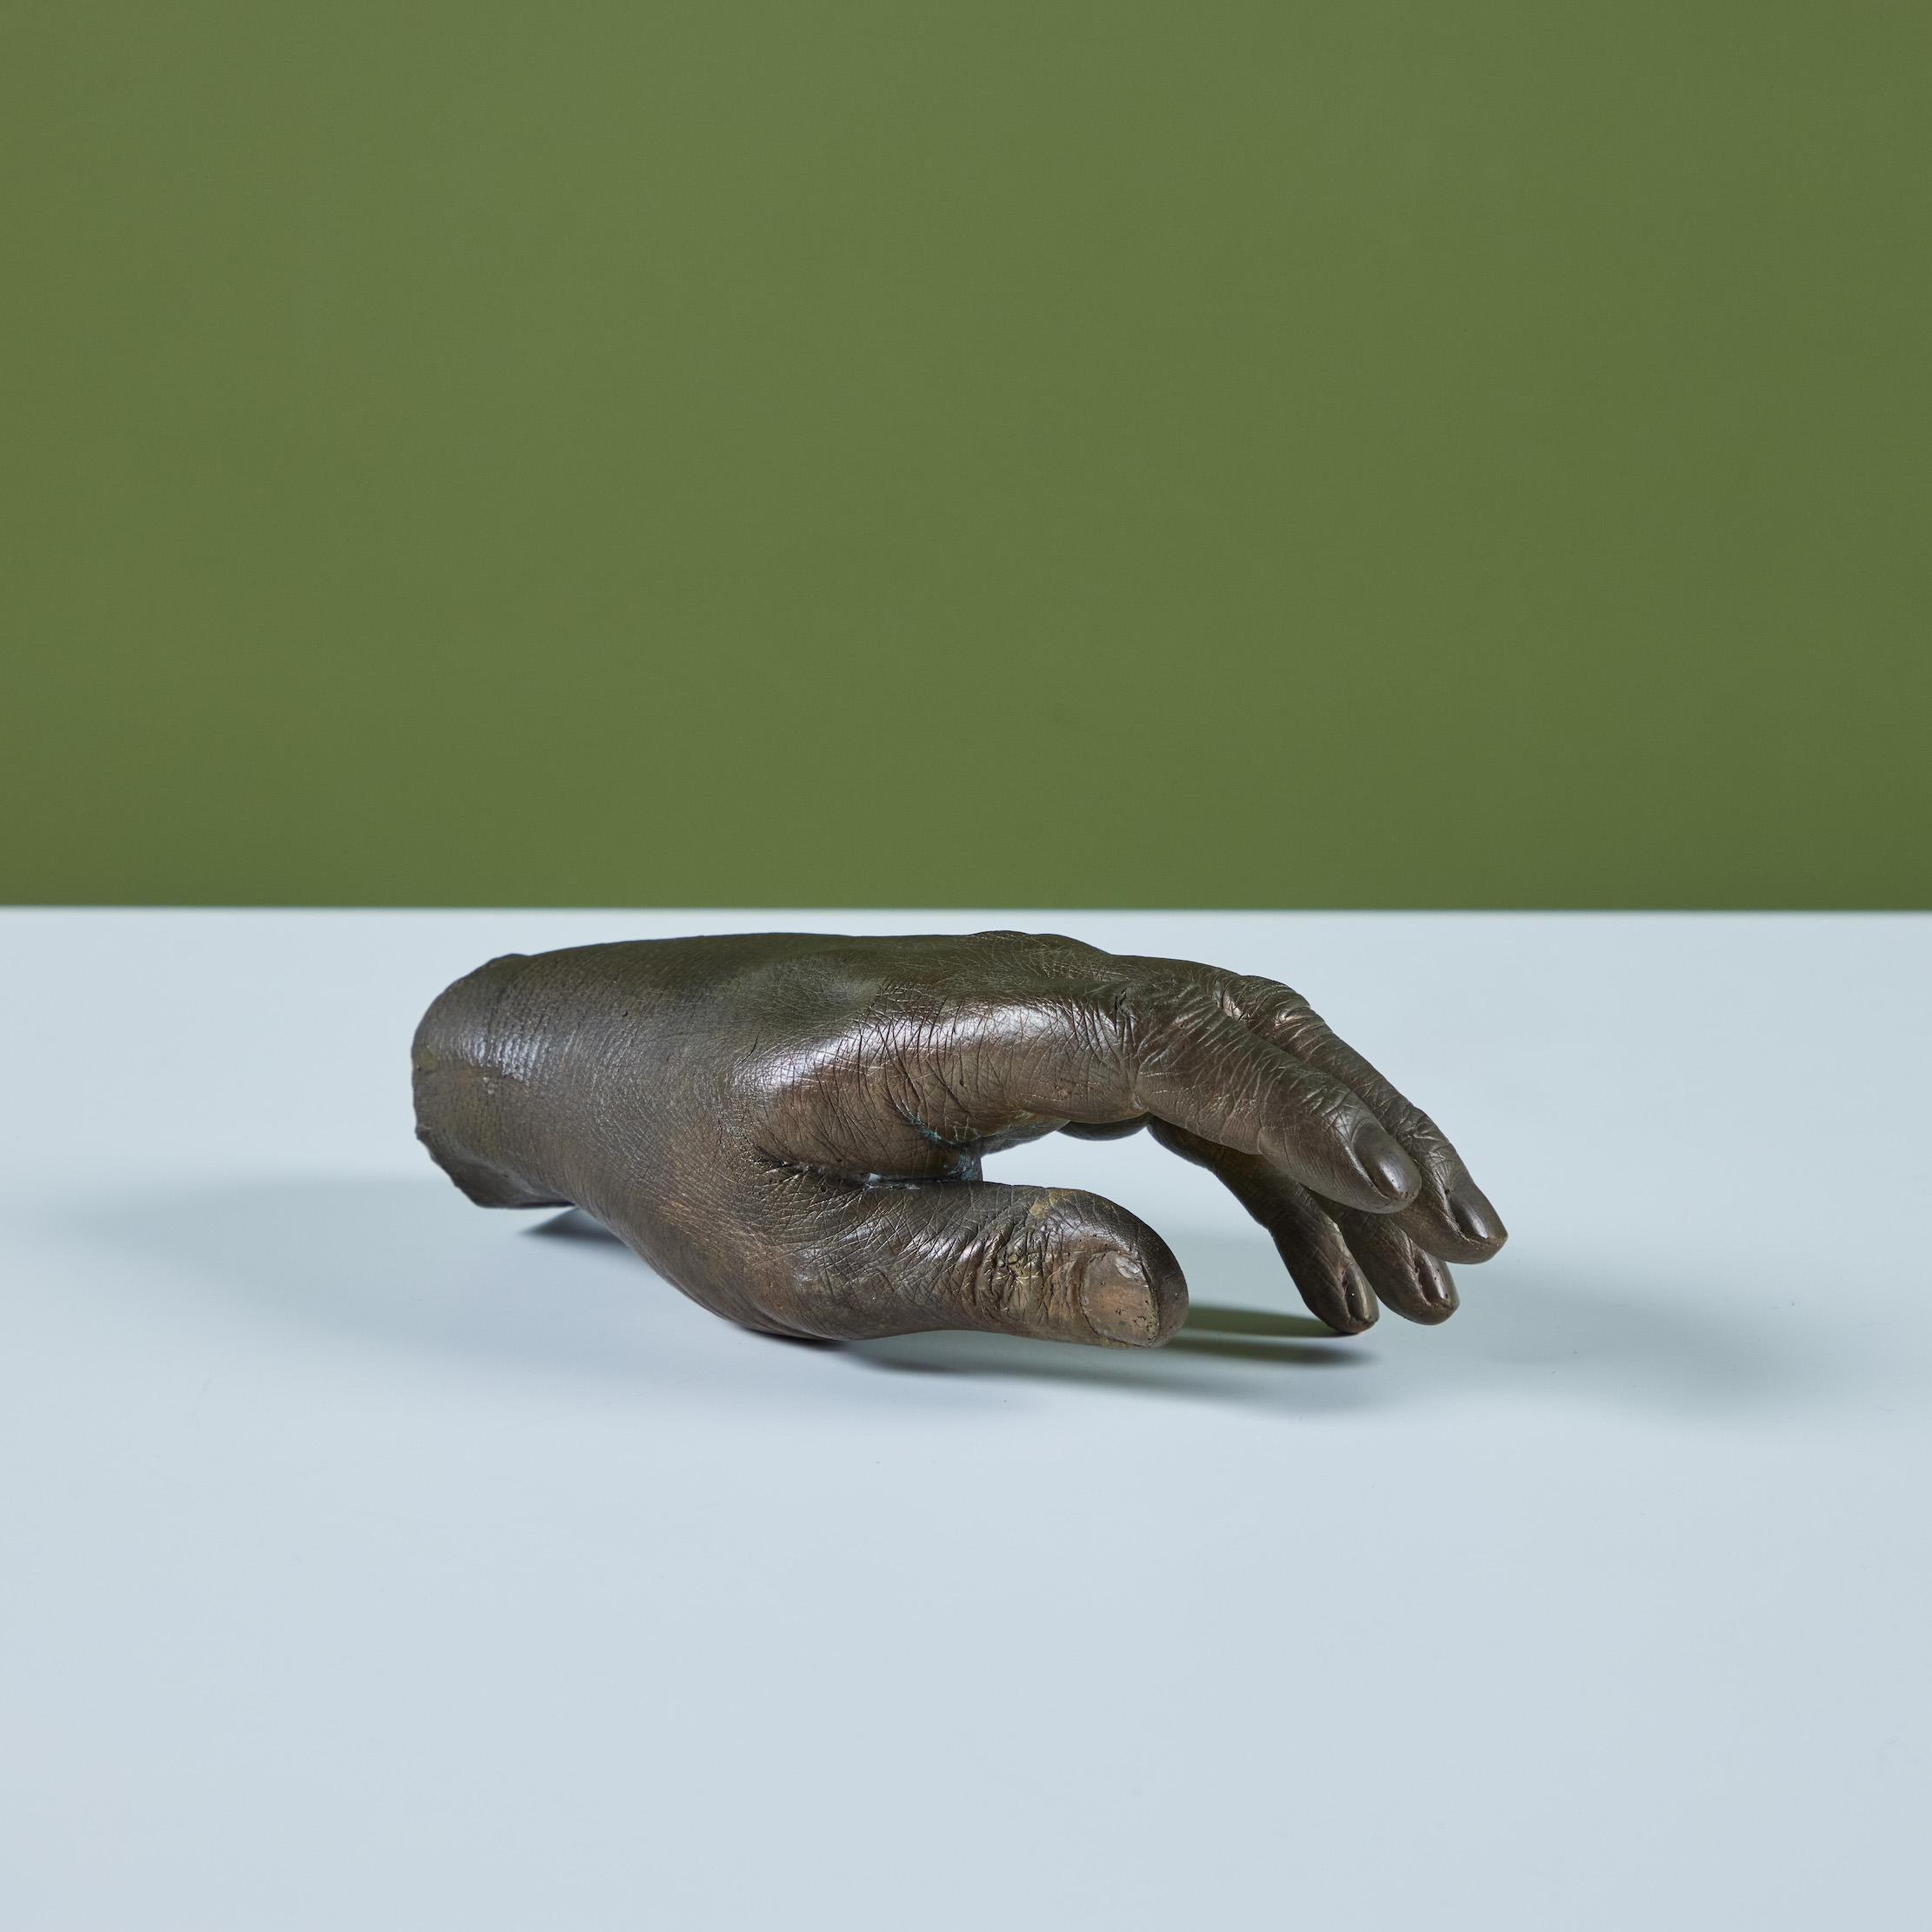 Cast bronze hand in the style of Pietrina Checcacci. The hand is hollow with many intricate knuckle and finger nail details. Crafted to perch on a flat surface and positioned as desired.

Dimensions
8.25